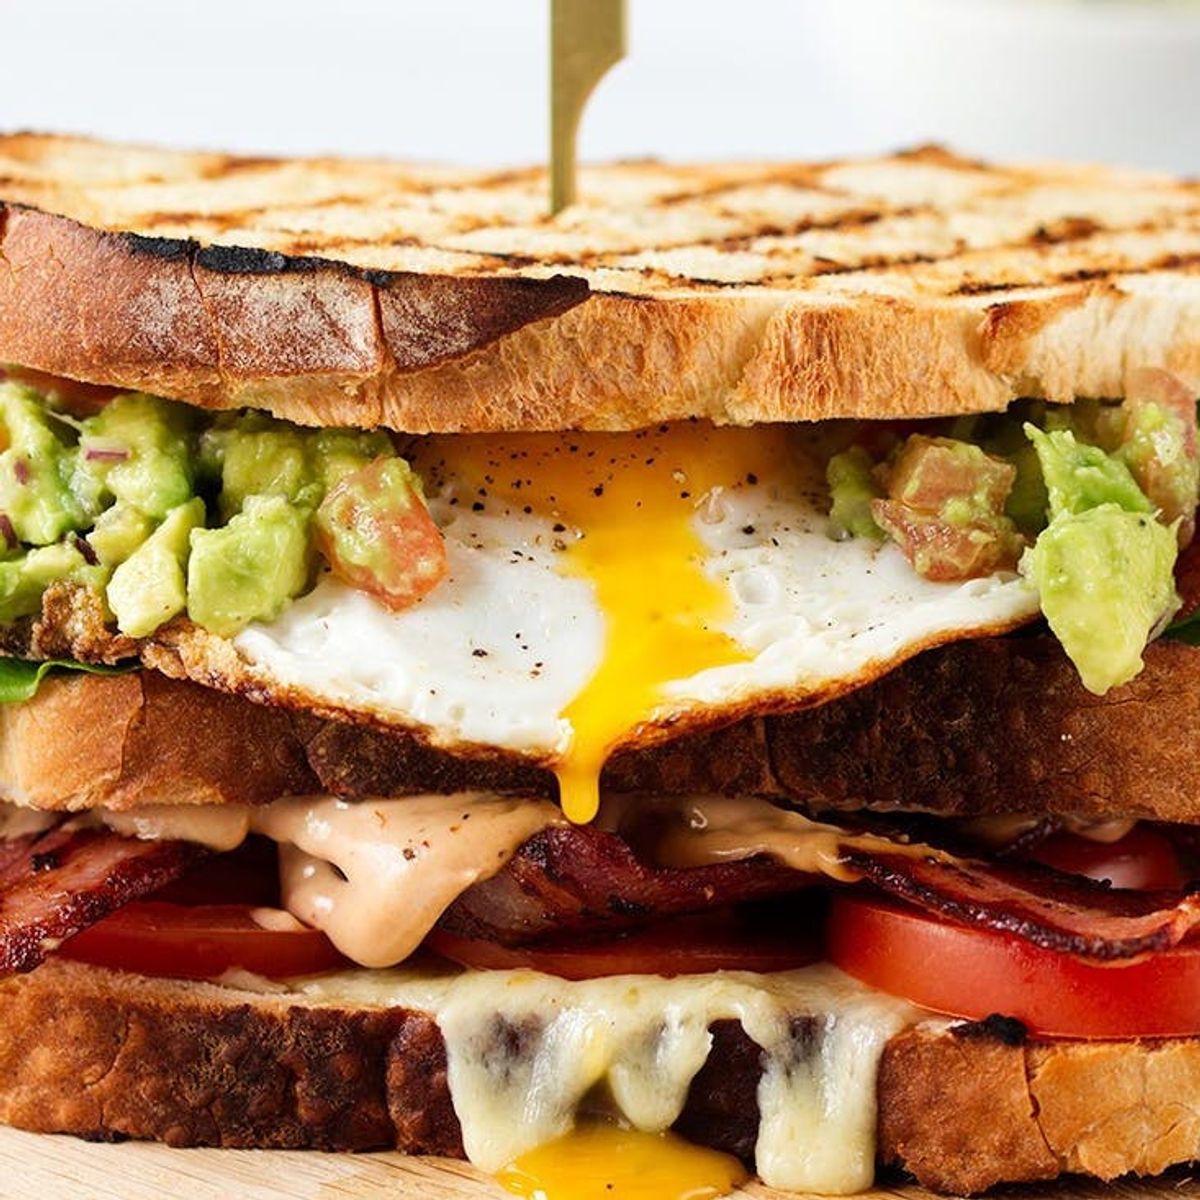 Here’s the Sandwich You Should Order (or Make) Based on Your Zodiac